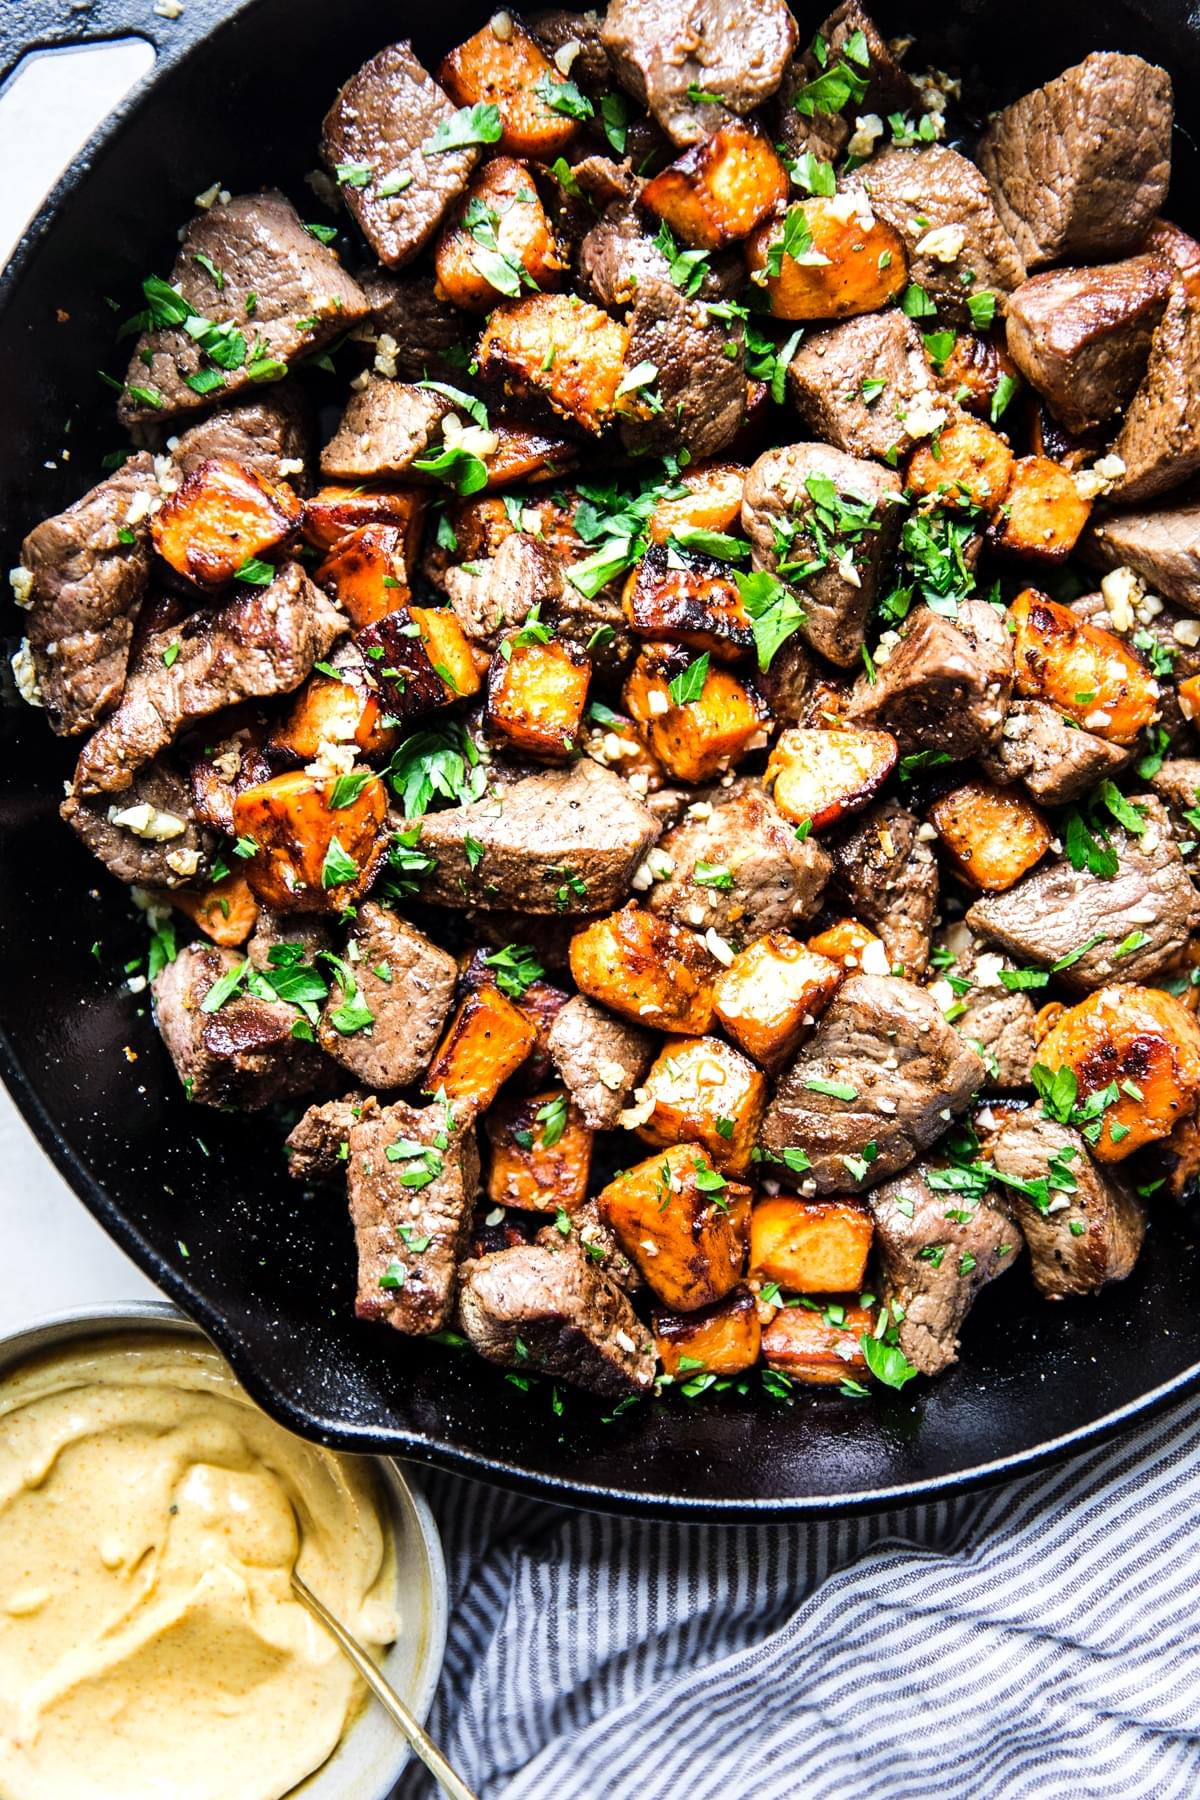 Garlic steak bites with sweet potatoes in a cast iron pan next to curry aioli in a small bowl.